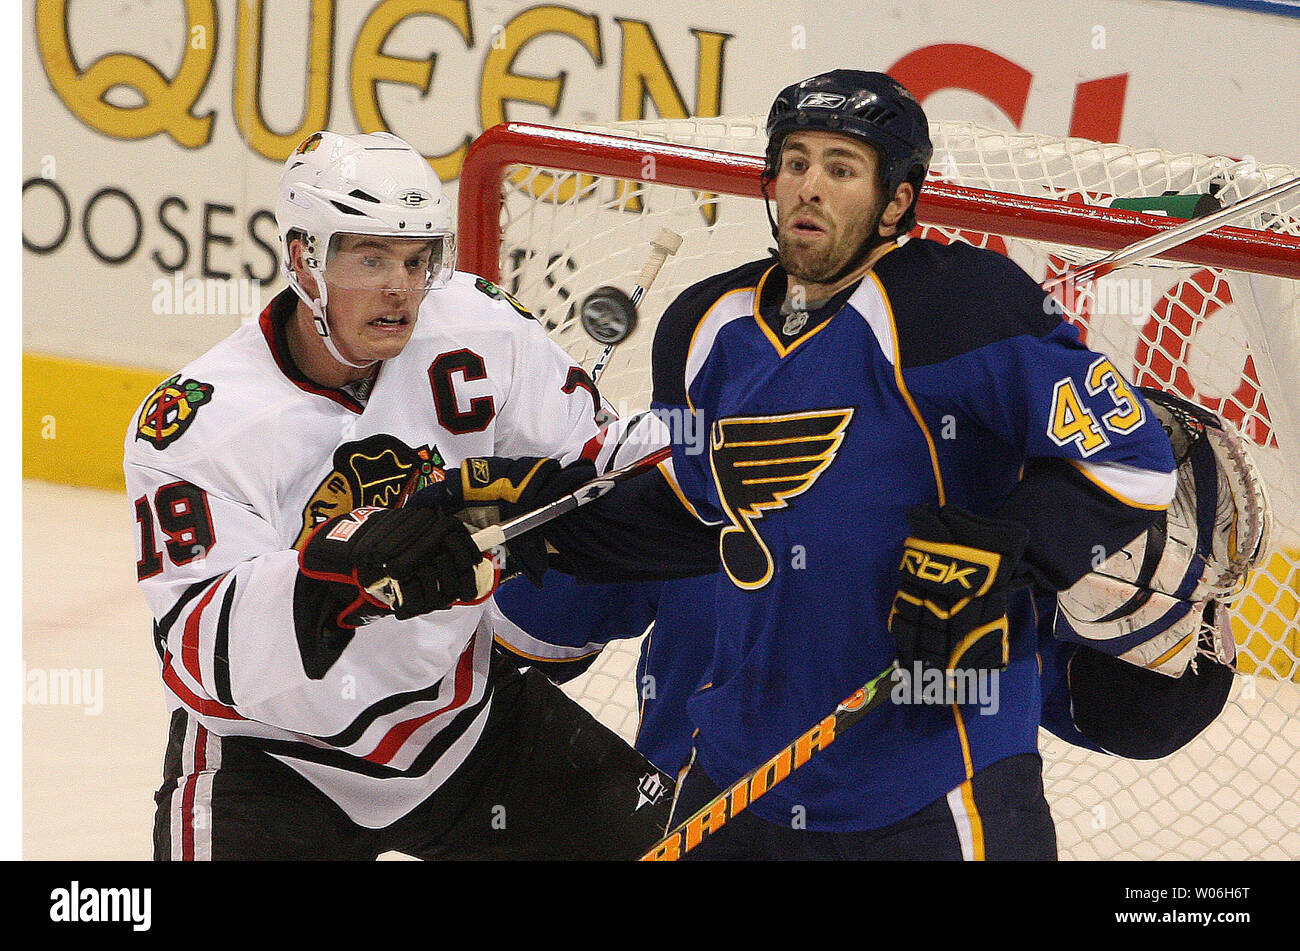 Chicago Blackhawks Andrew Ladd (L) and St